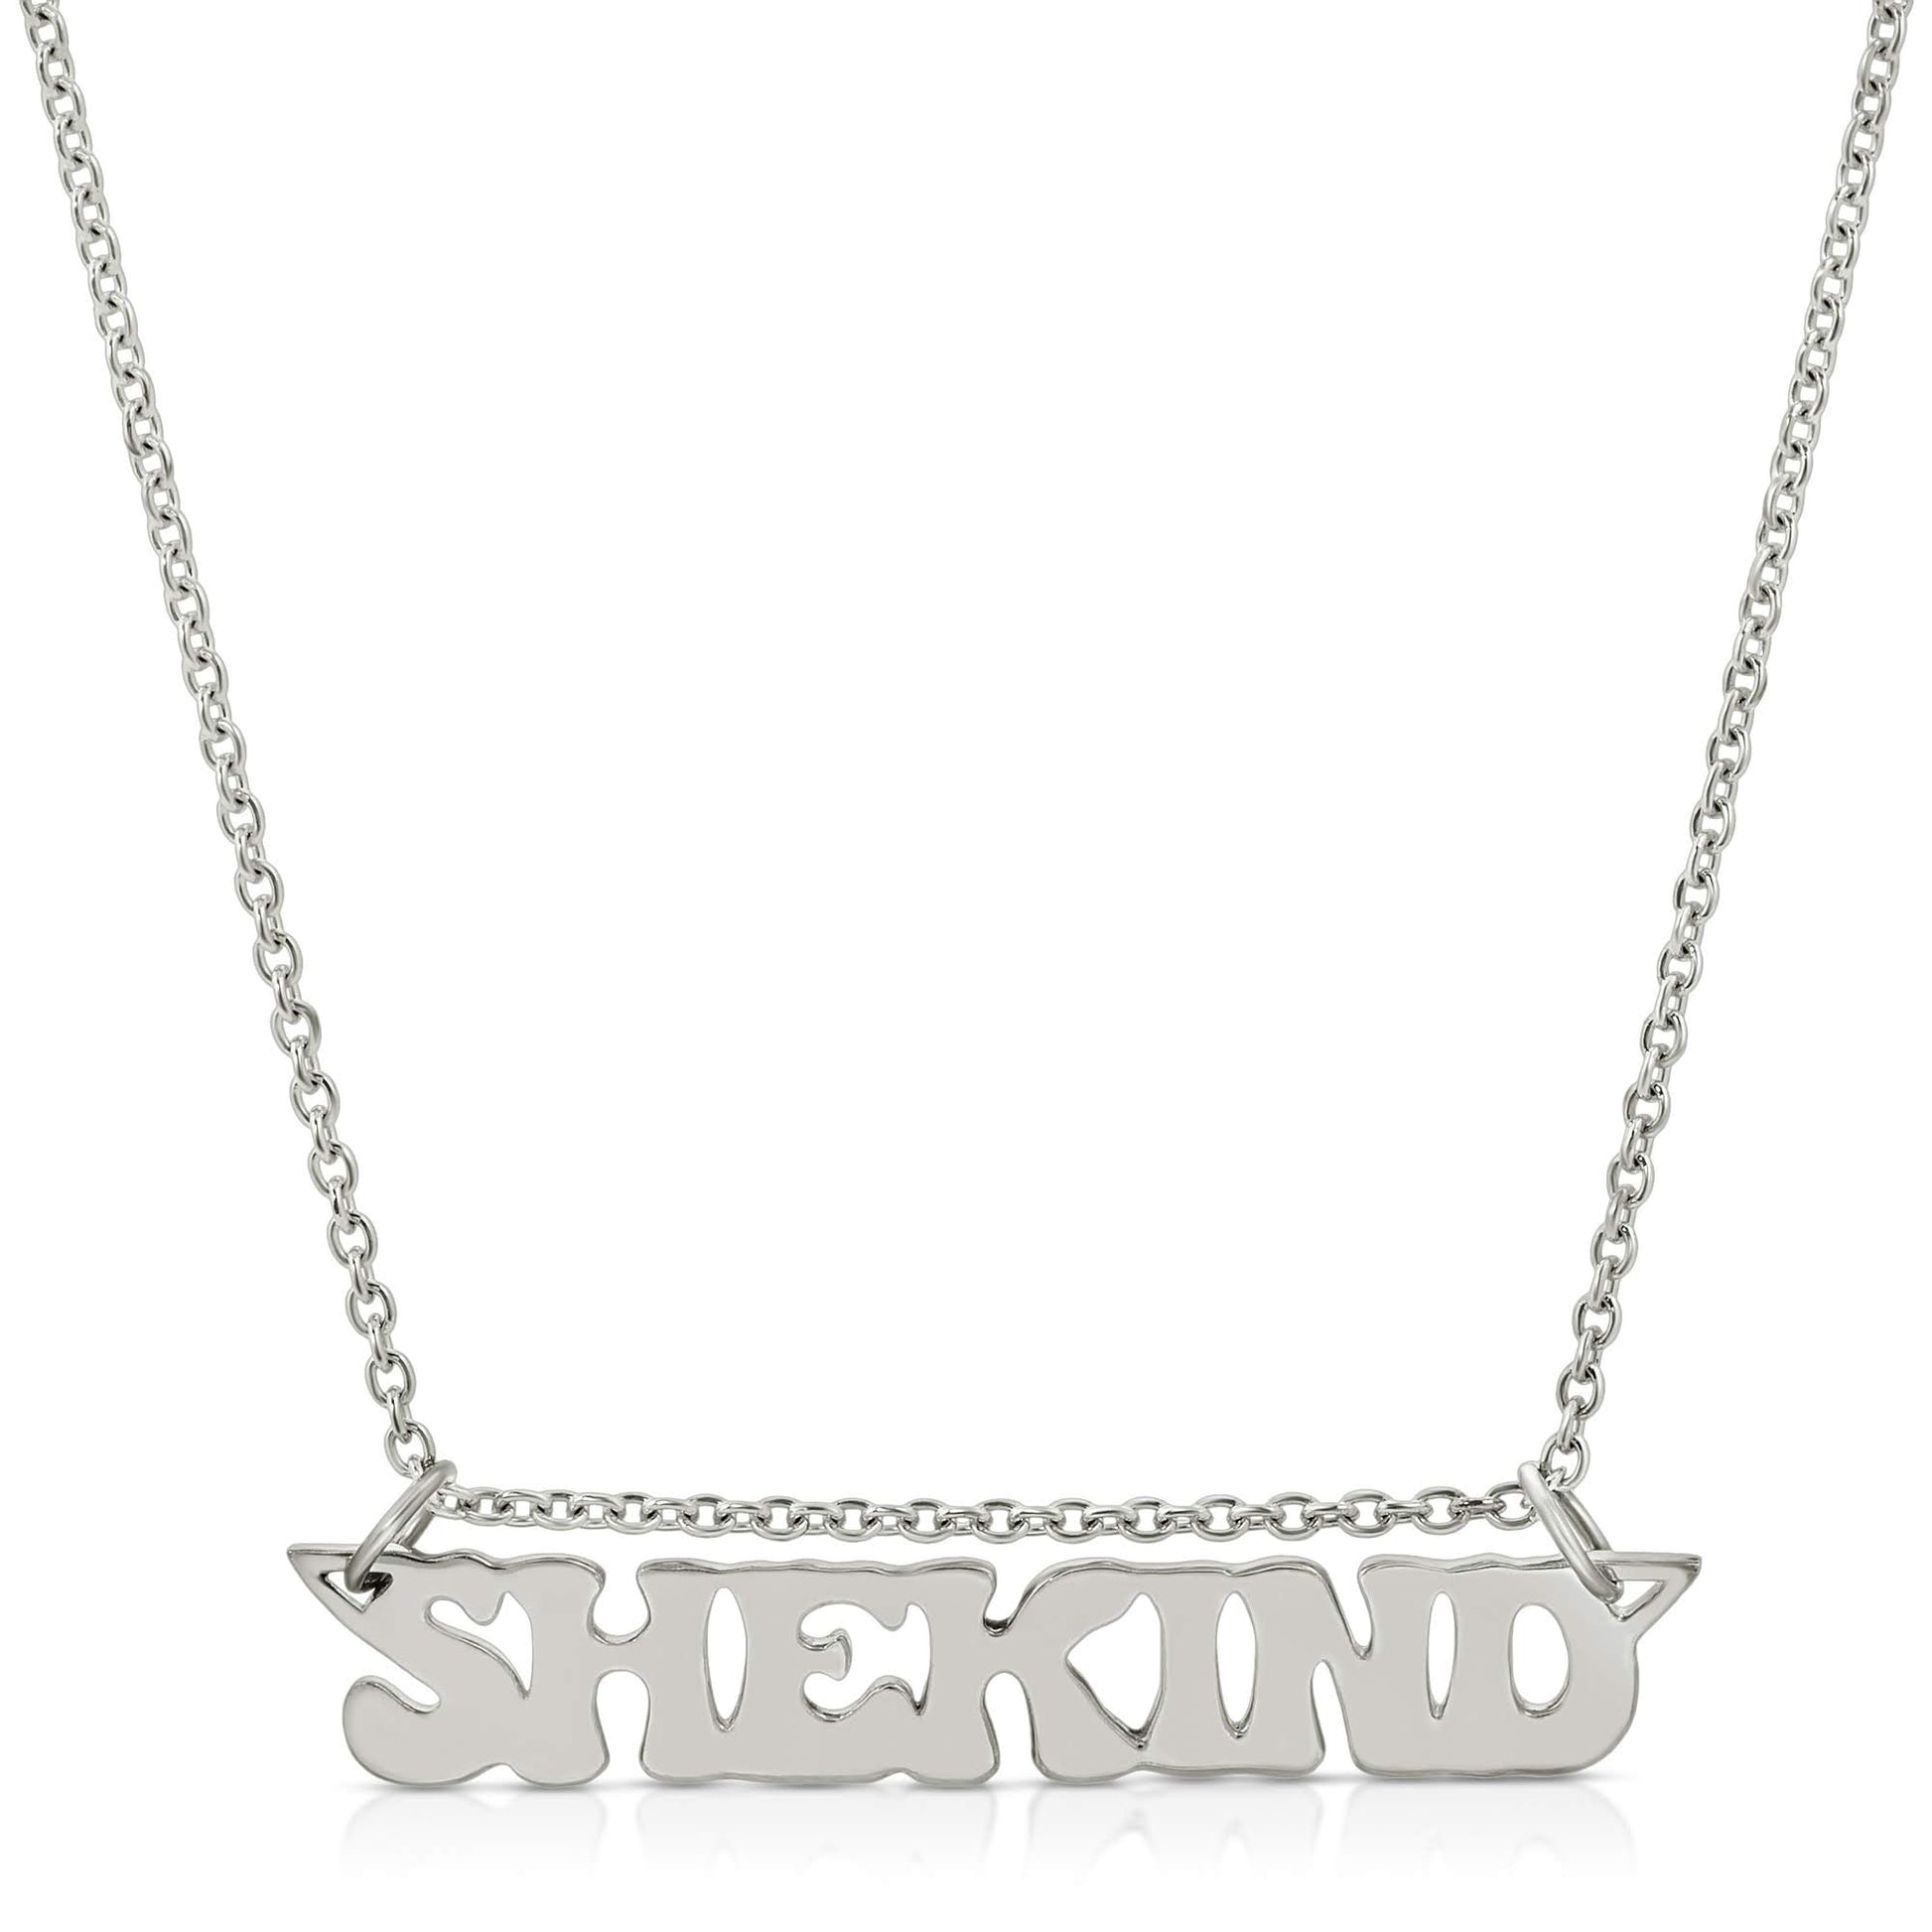 18K solid white gold name plate necklace that says shekind